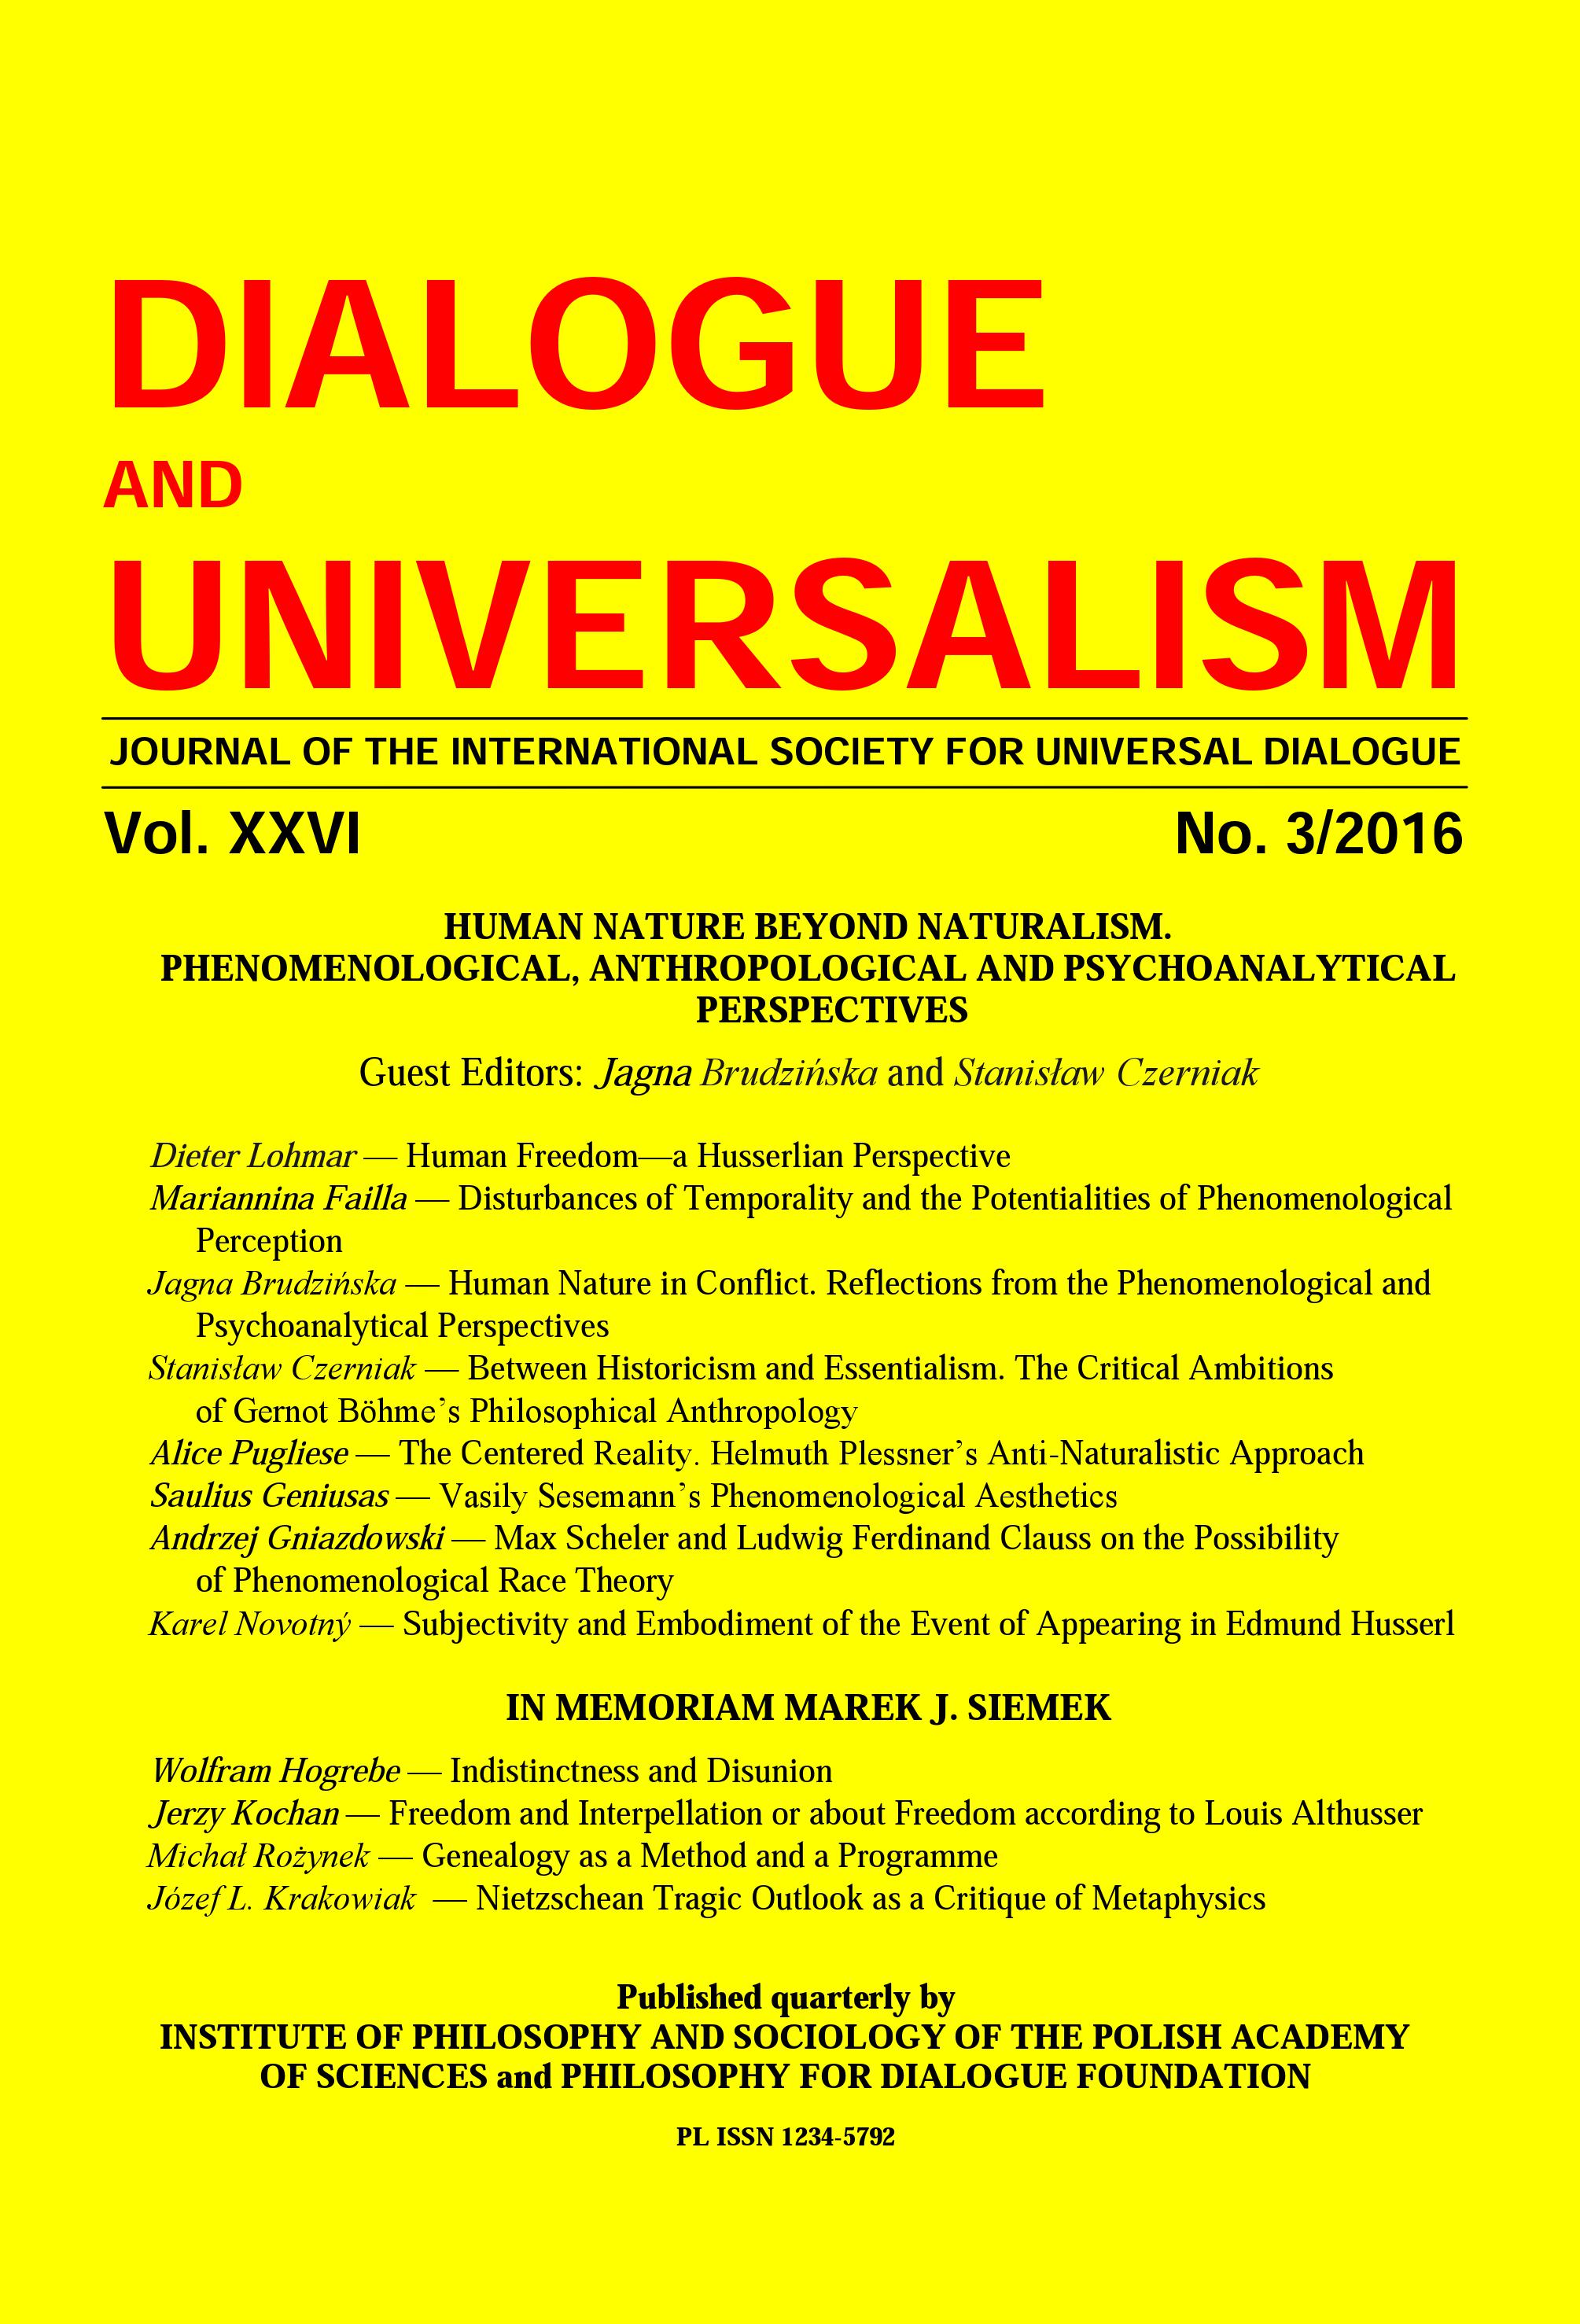 BETWEEN HISTORICISM AND ESSENTIALISM. THE CRITICAL AMBITIONS OF GERNOT BÖHME’S PHILOSOPHICAL ANTHROPOLOGY Cover Image